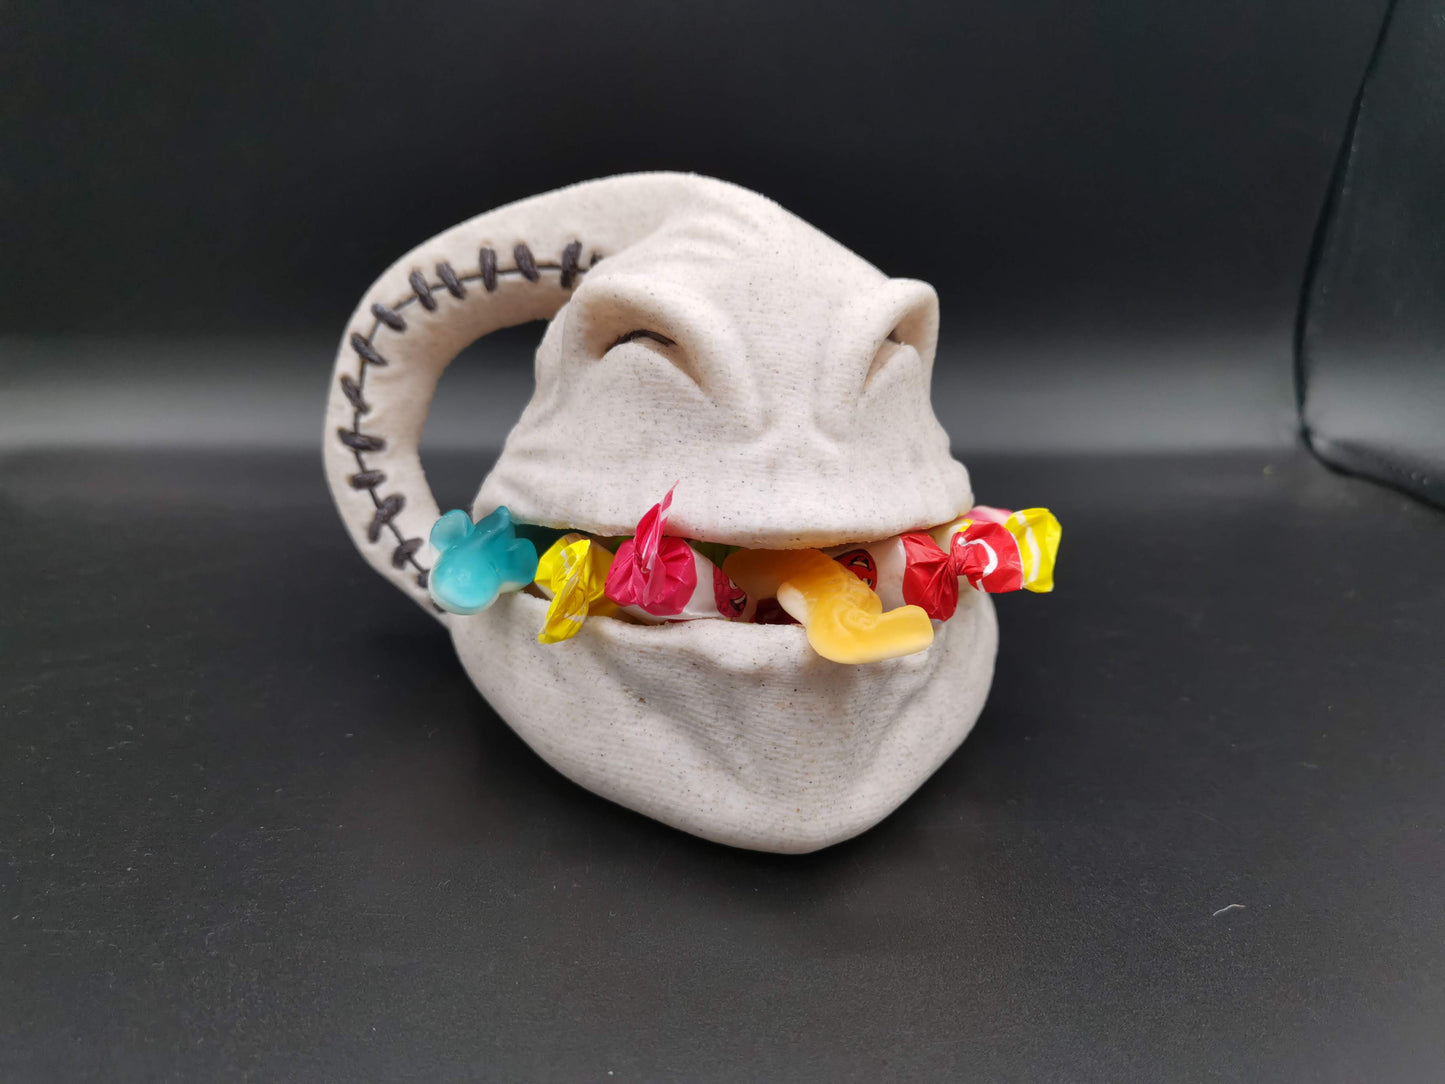 Oogie Boogie candy bowl with candy inside